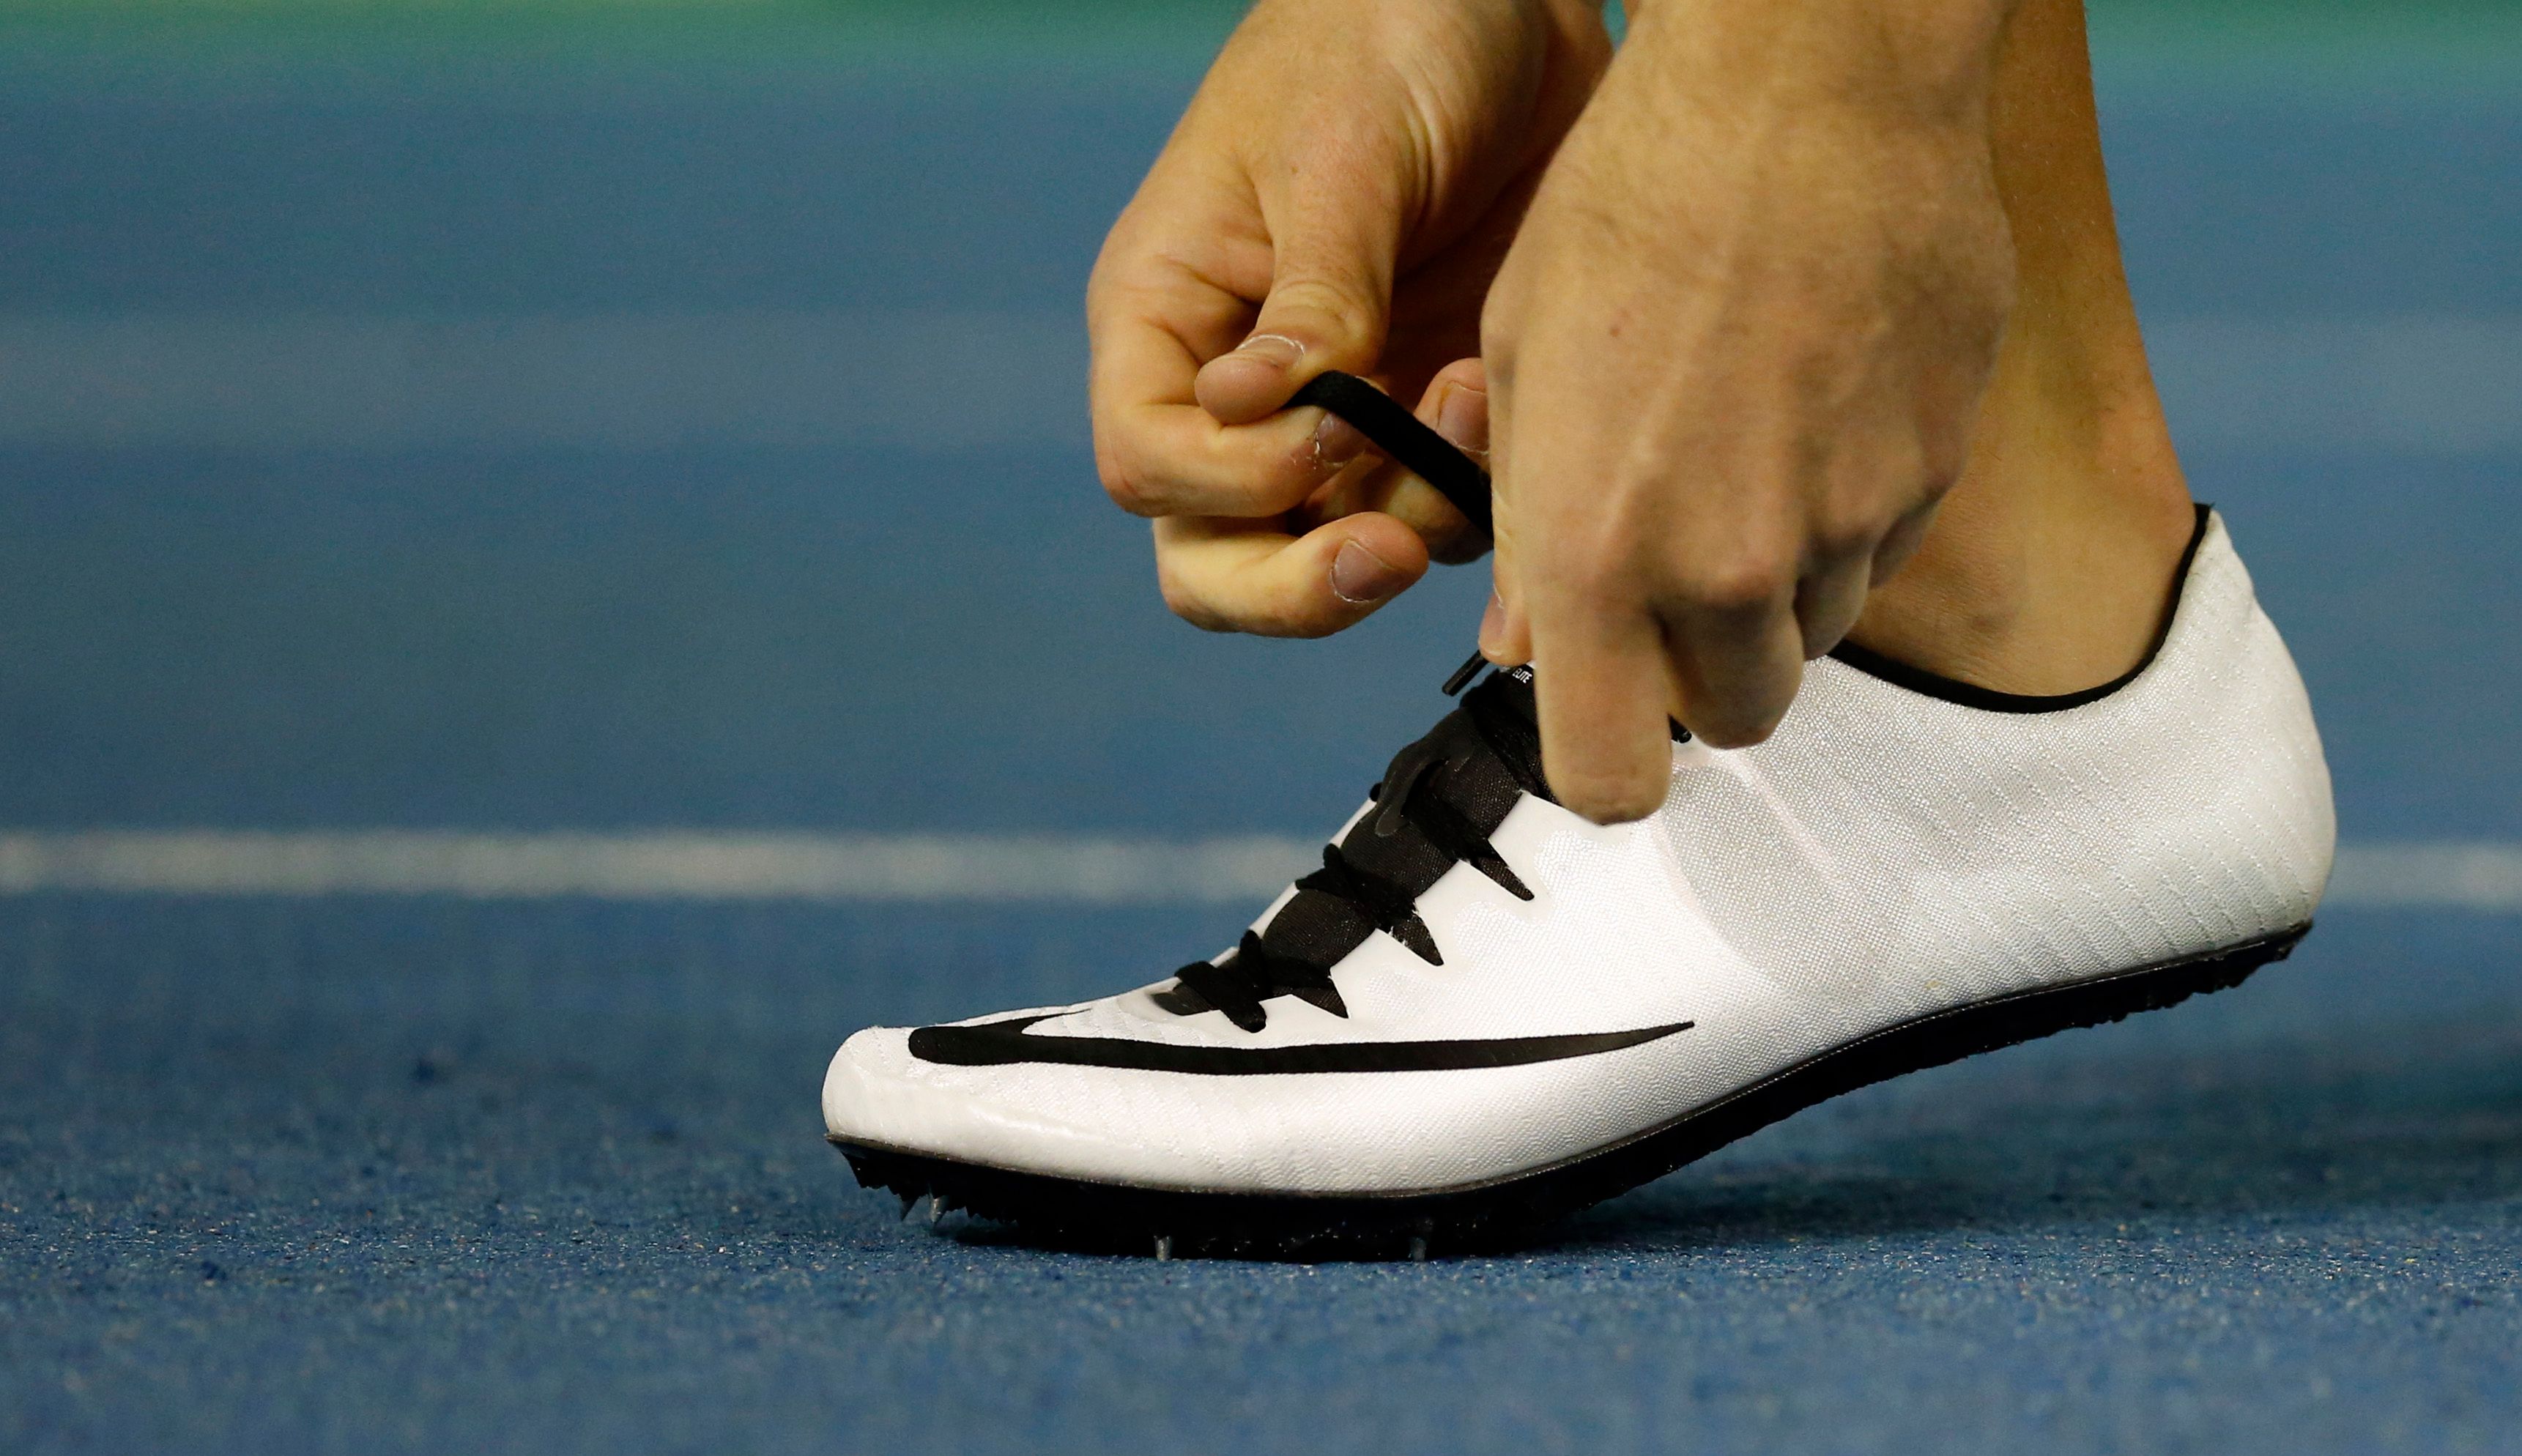 Athlete tying up their spikes.